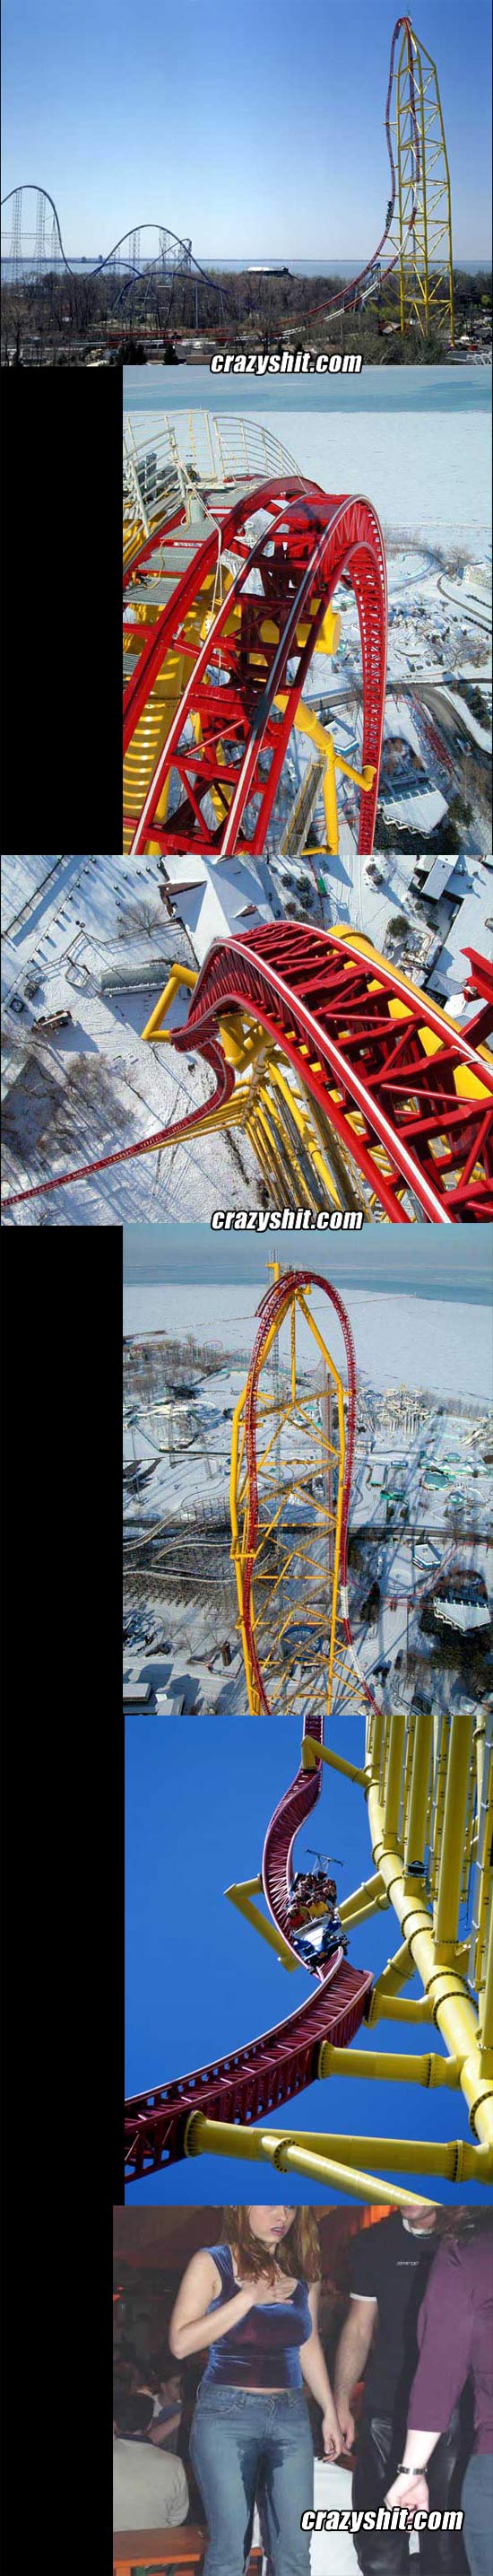 New piss your pants rollercoaster in ohio